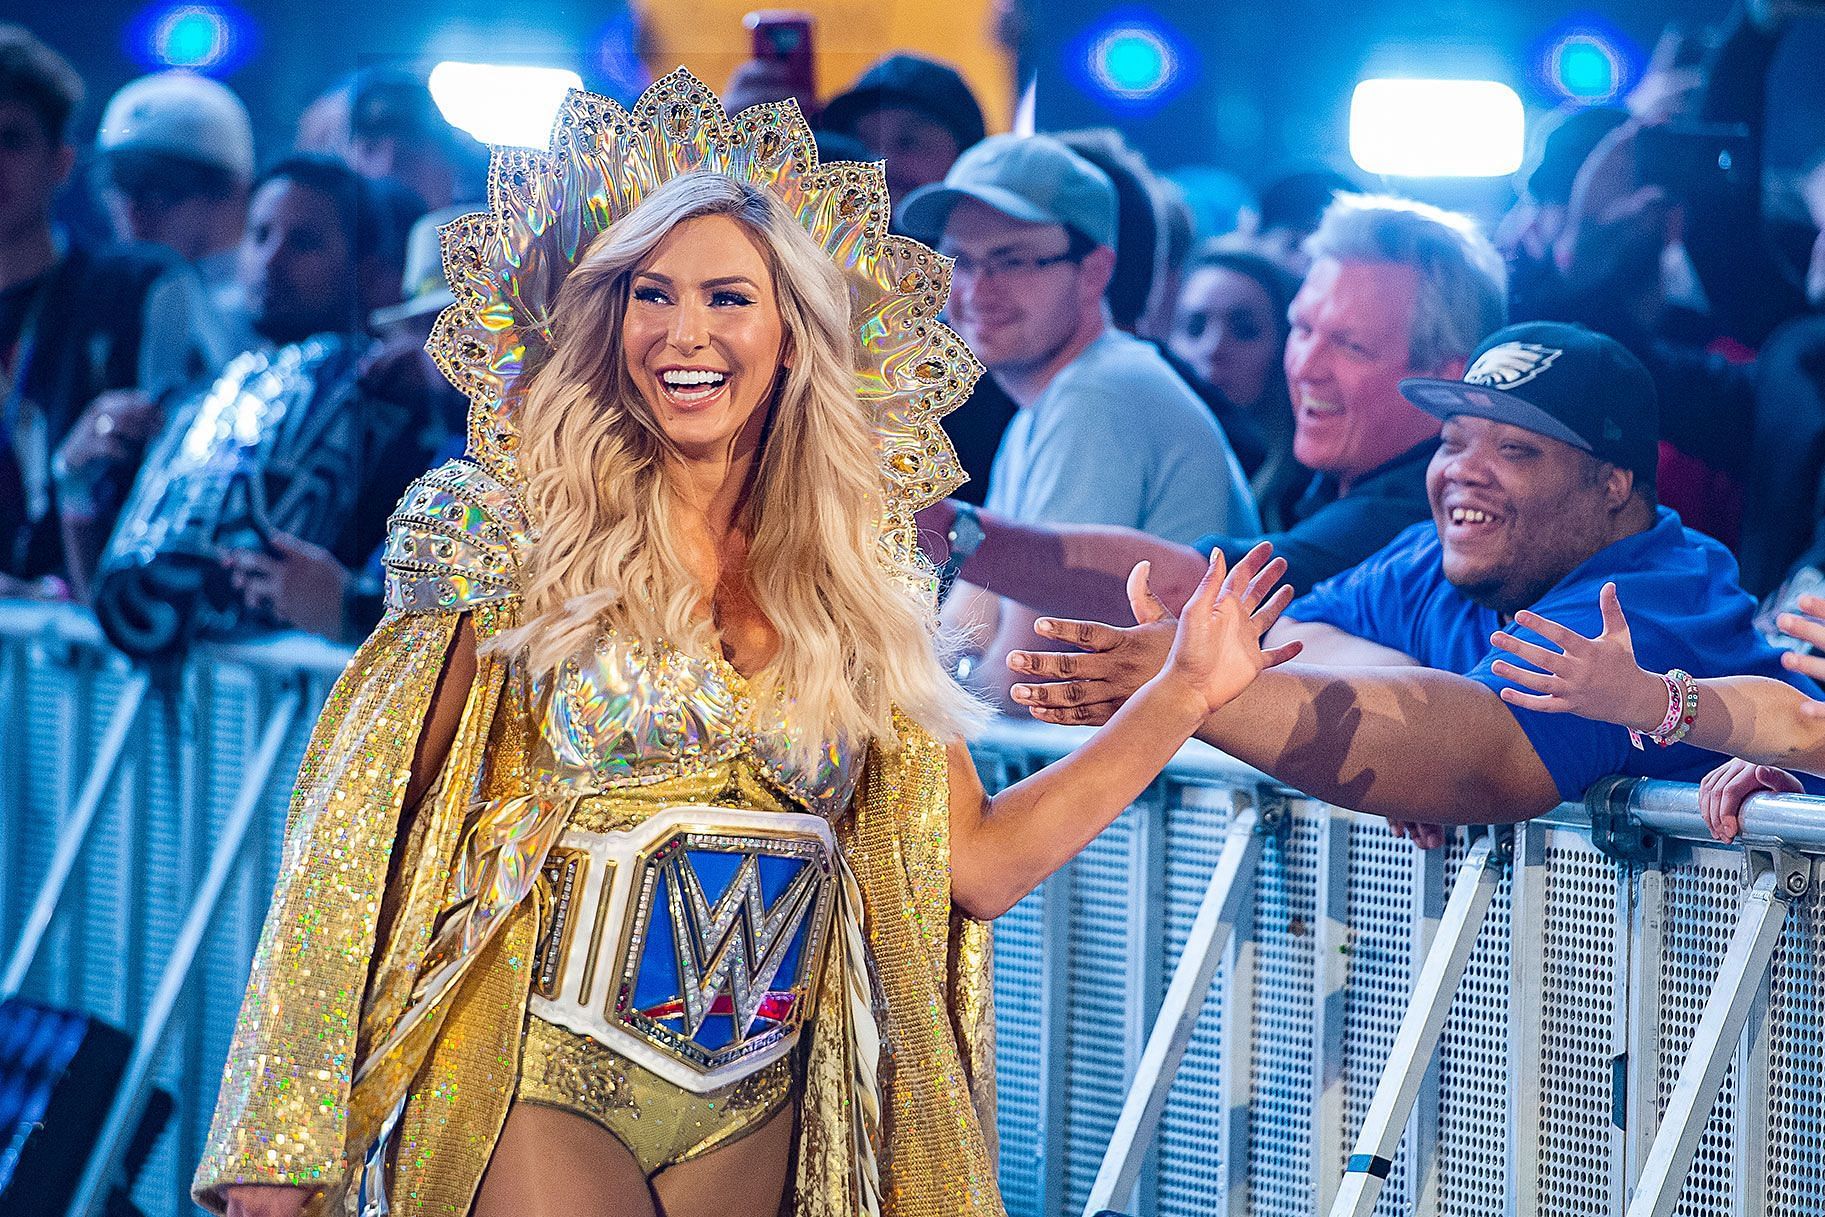 Charlotte Flair is a 14 time WWE Women